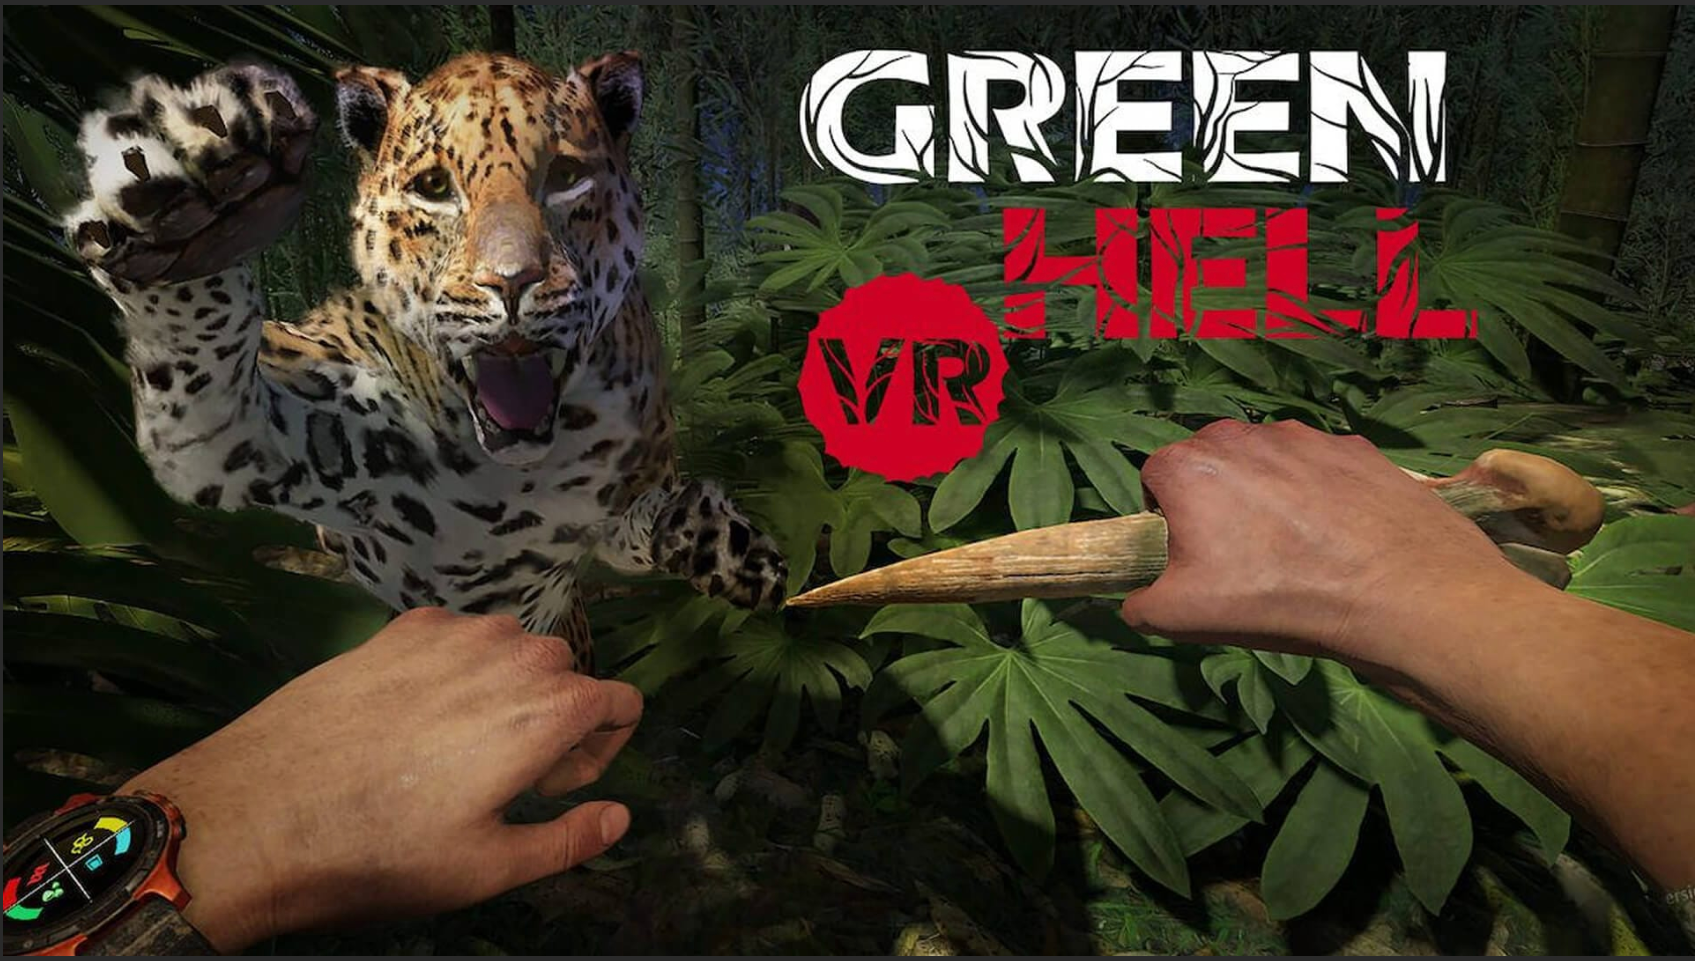 Hell vr. Green Hell VR Oculus Quest 2. Стим Green Hell VR. Green Hell game. Green Hell game VR Oculus.